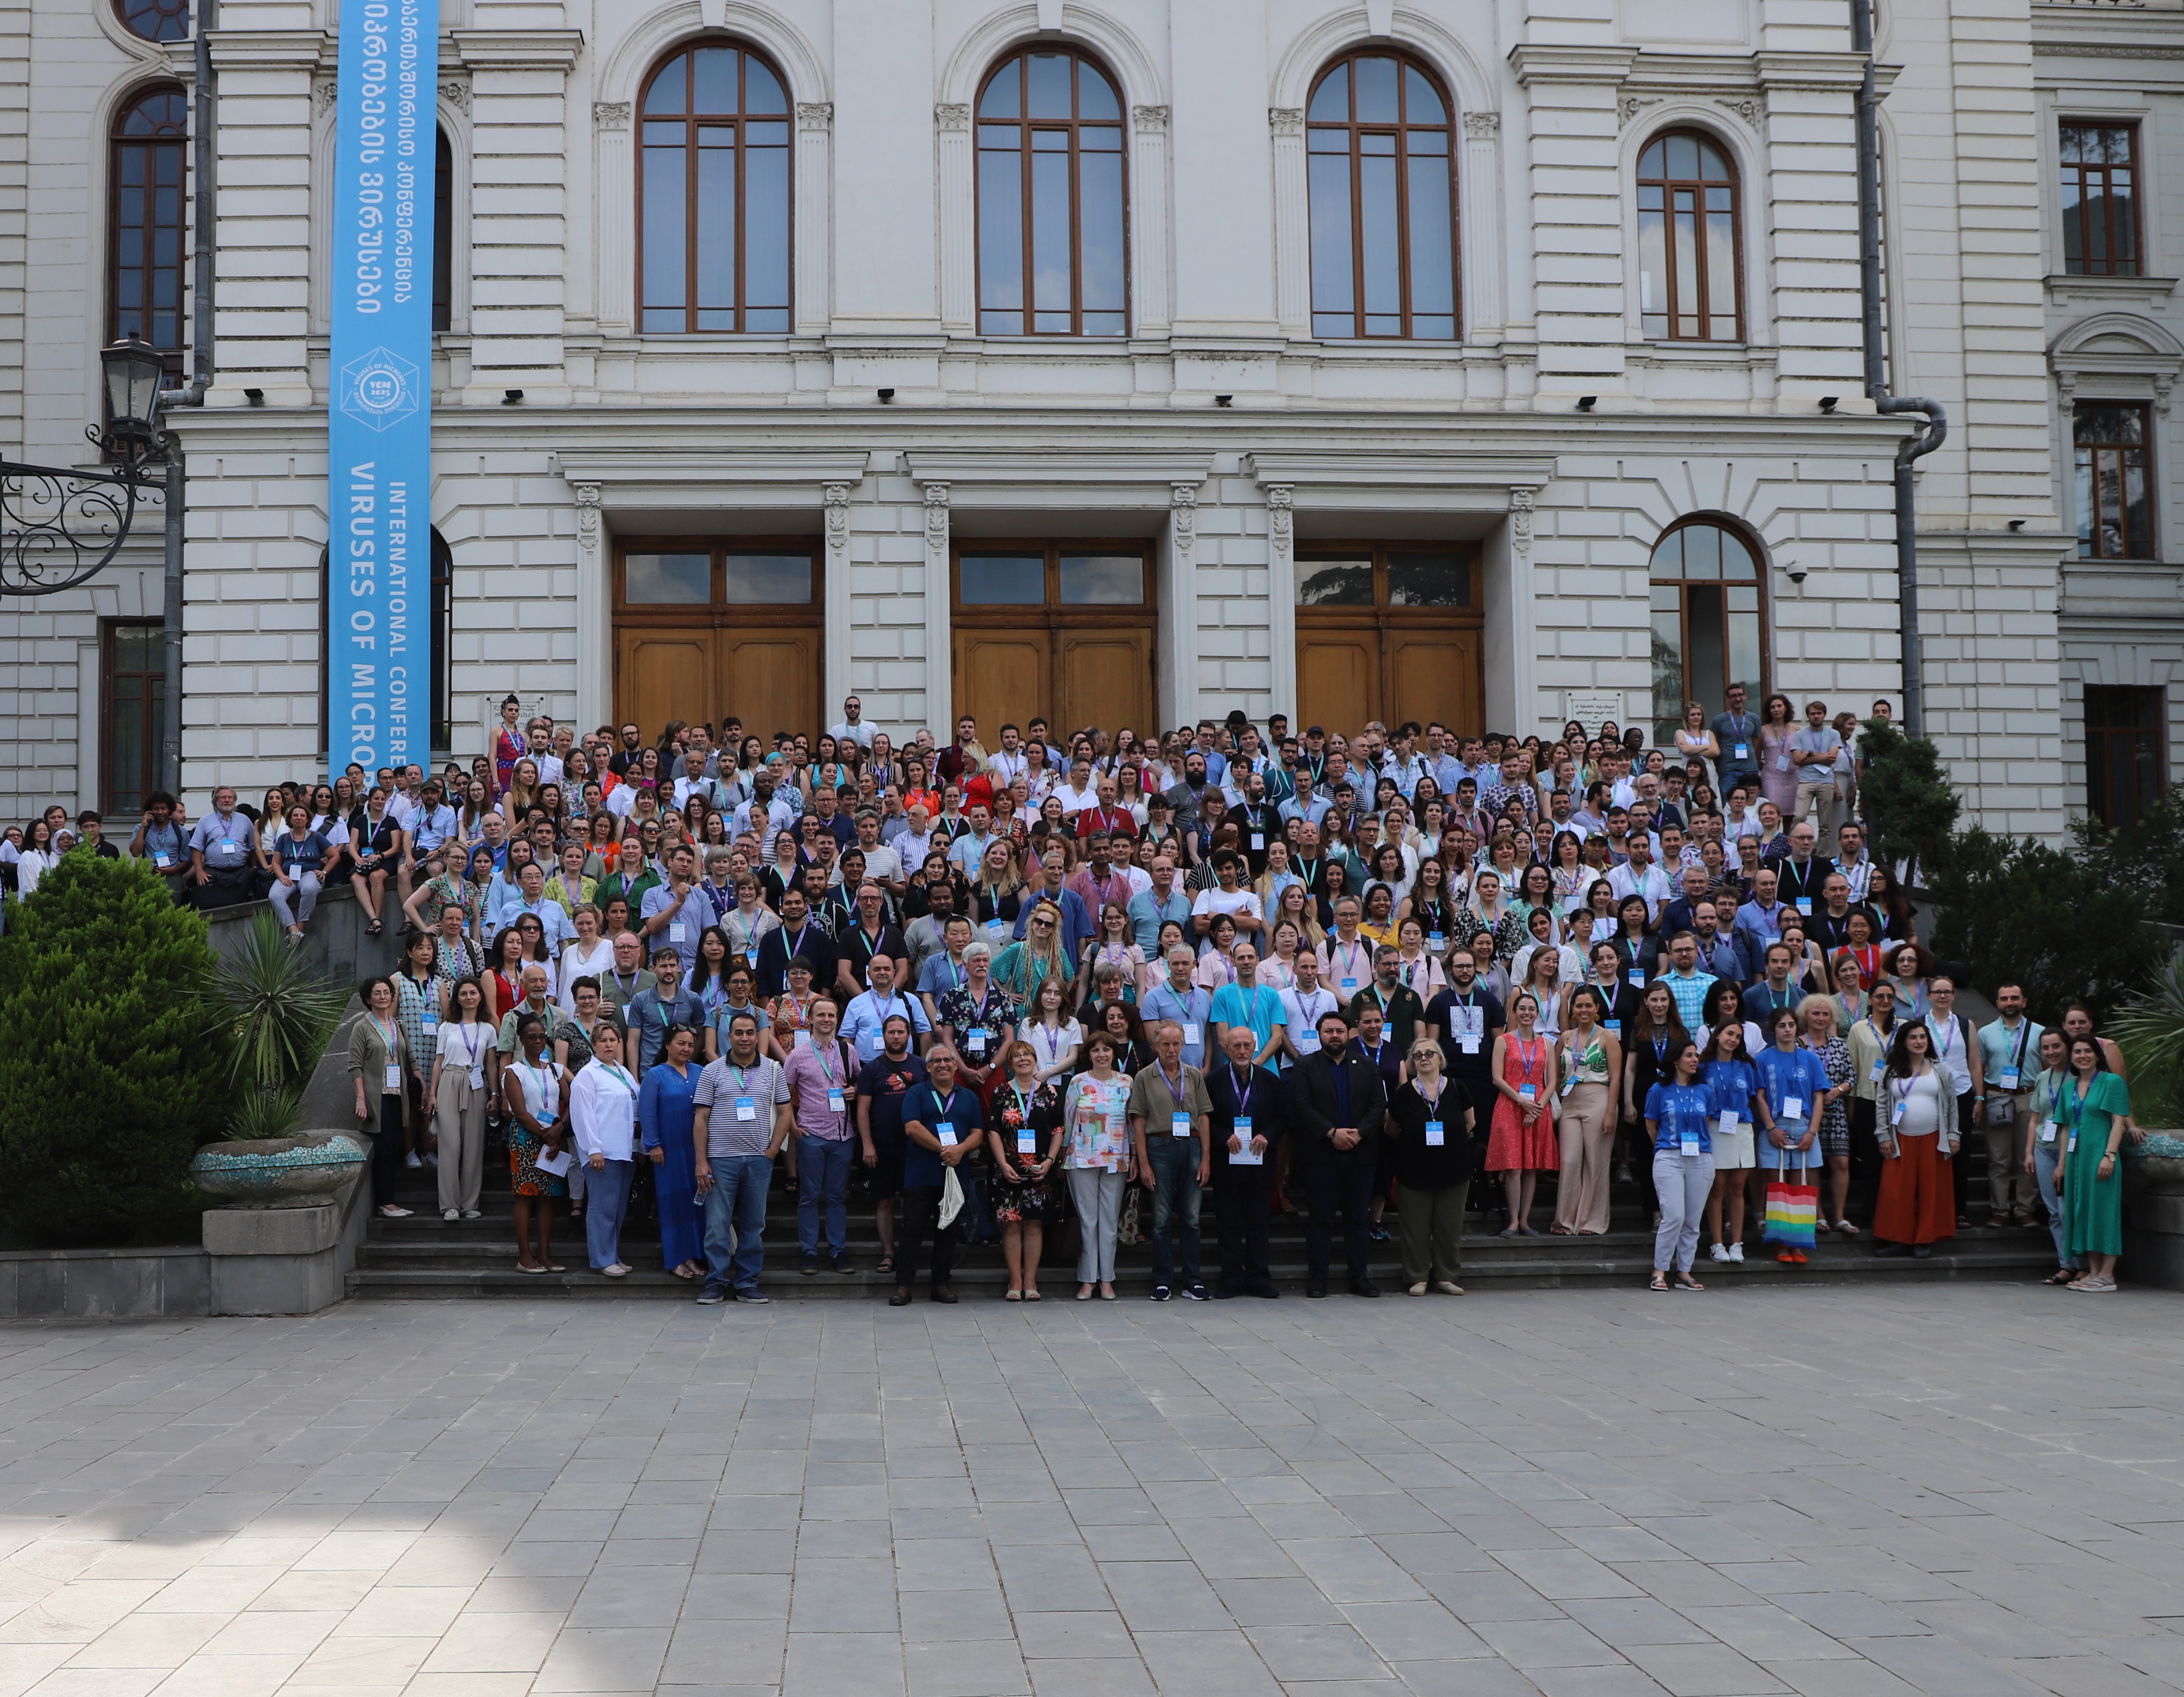 ISTC co-sponsored a conference “Viruses of Microbes” in Tbilisi, Georgia